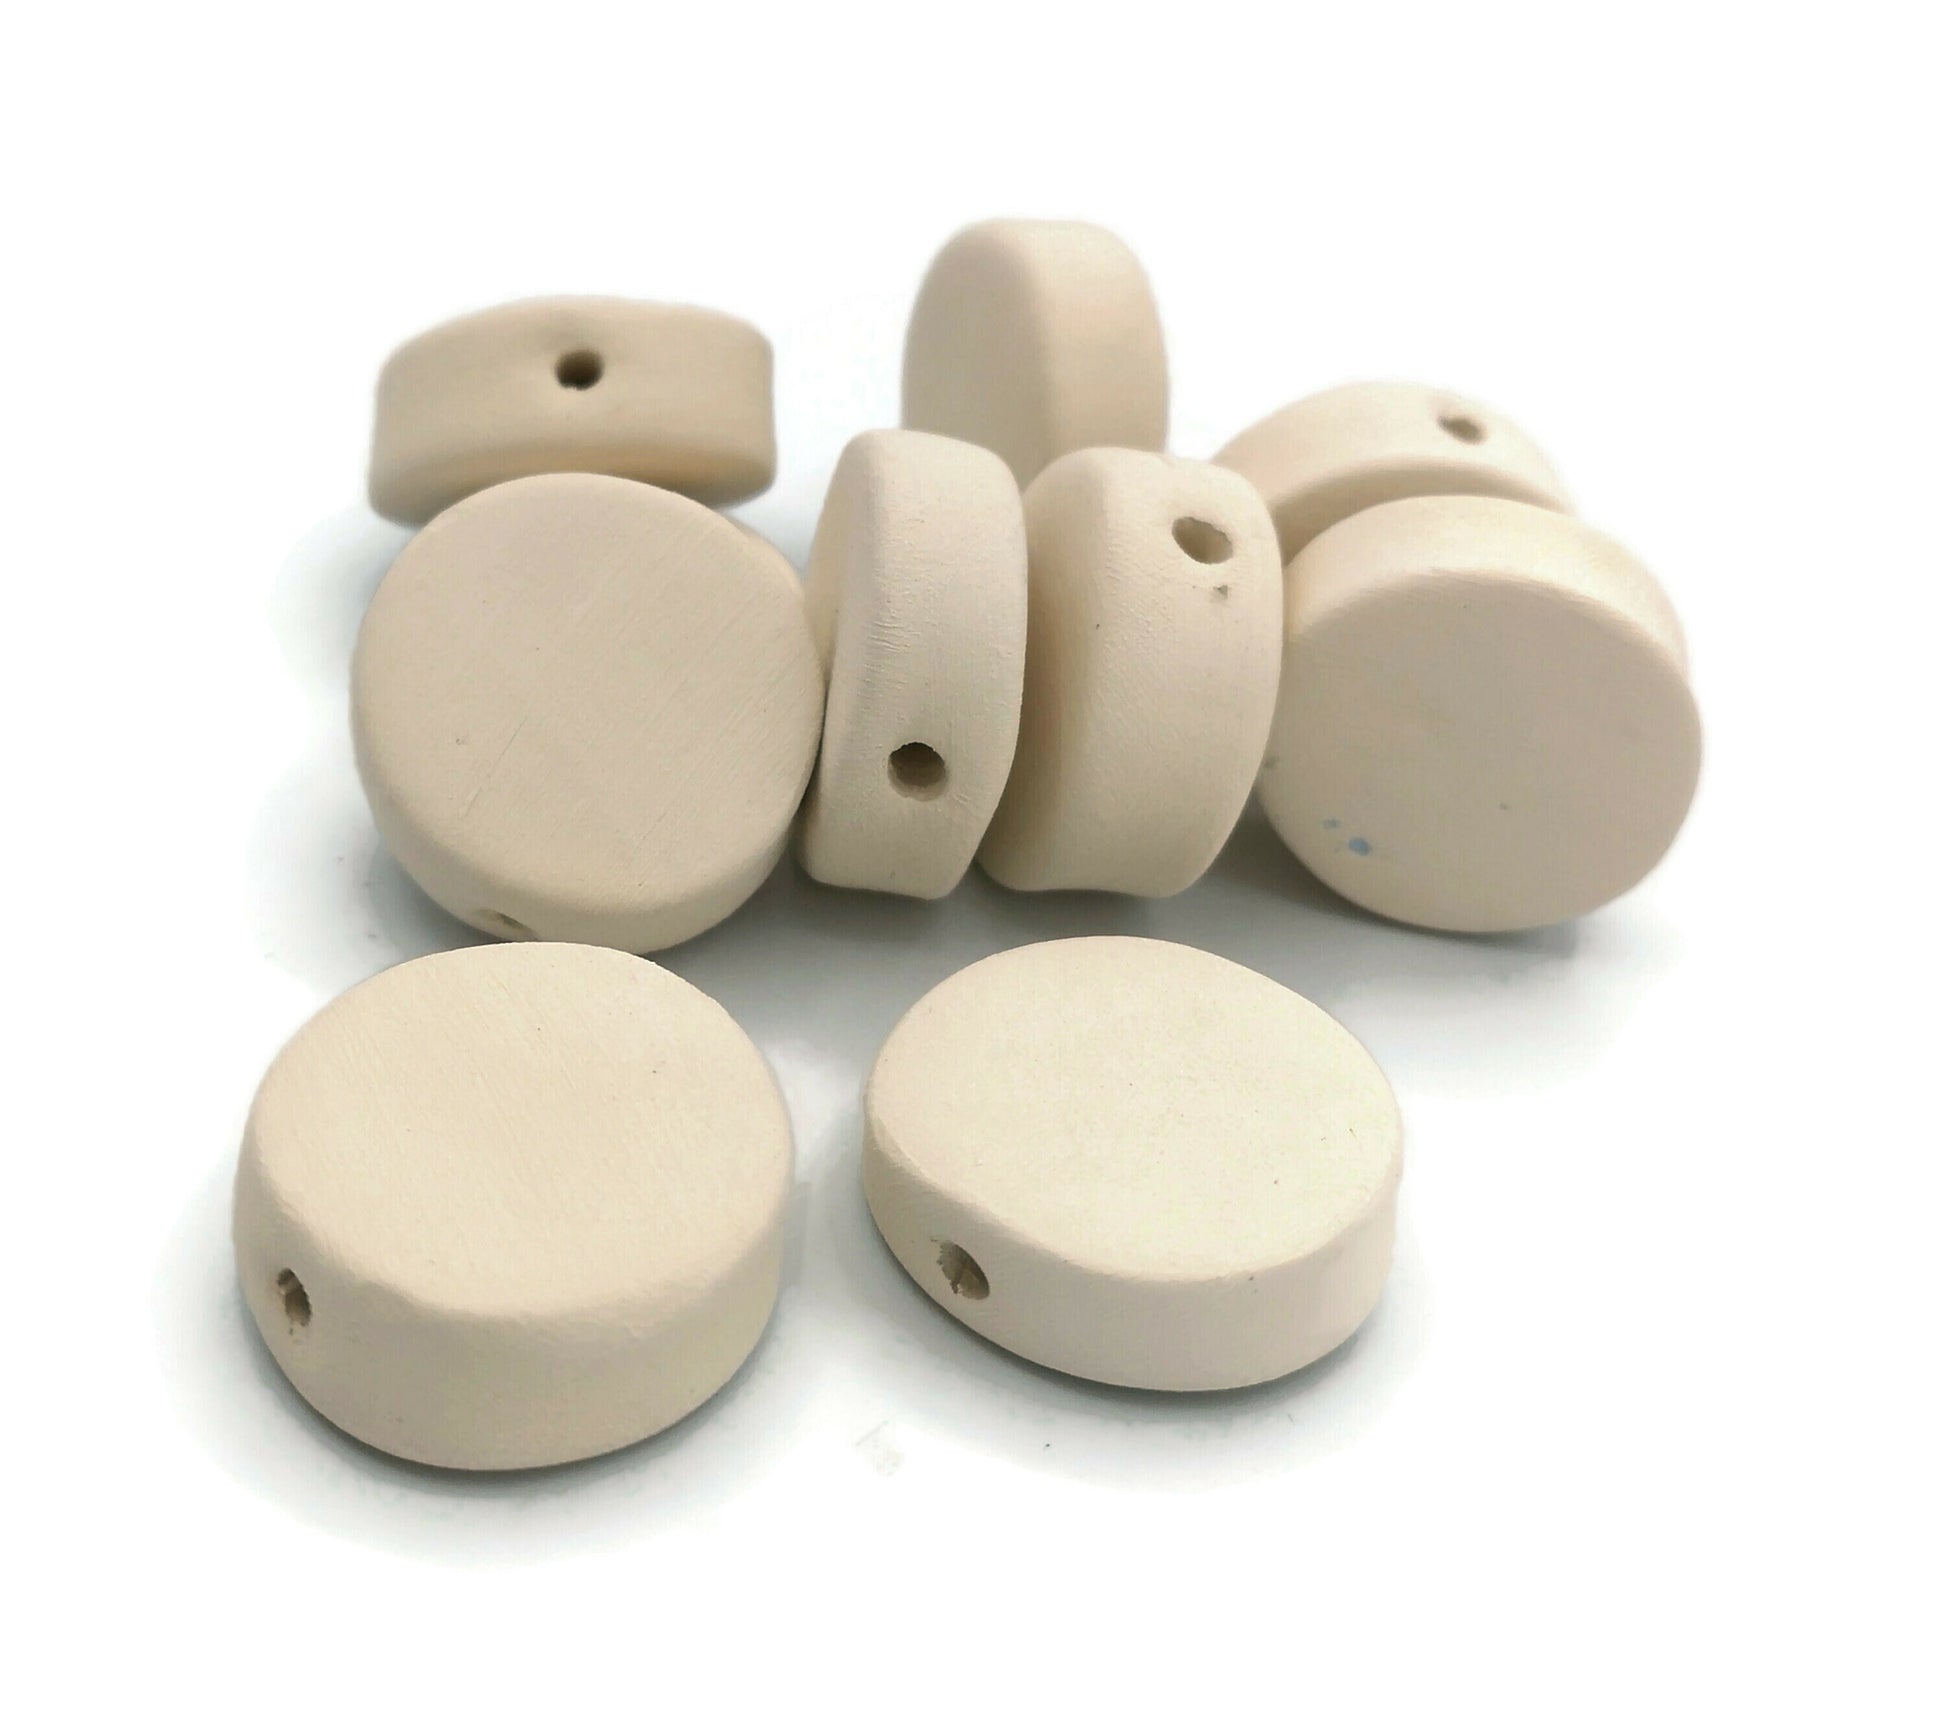 Handmade Ceramic Bisque Coin Bead Set, DIY Ready to Paint Large Blank Disc Tile for Jewelry or Crafting - Ceramica Ana Rafael